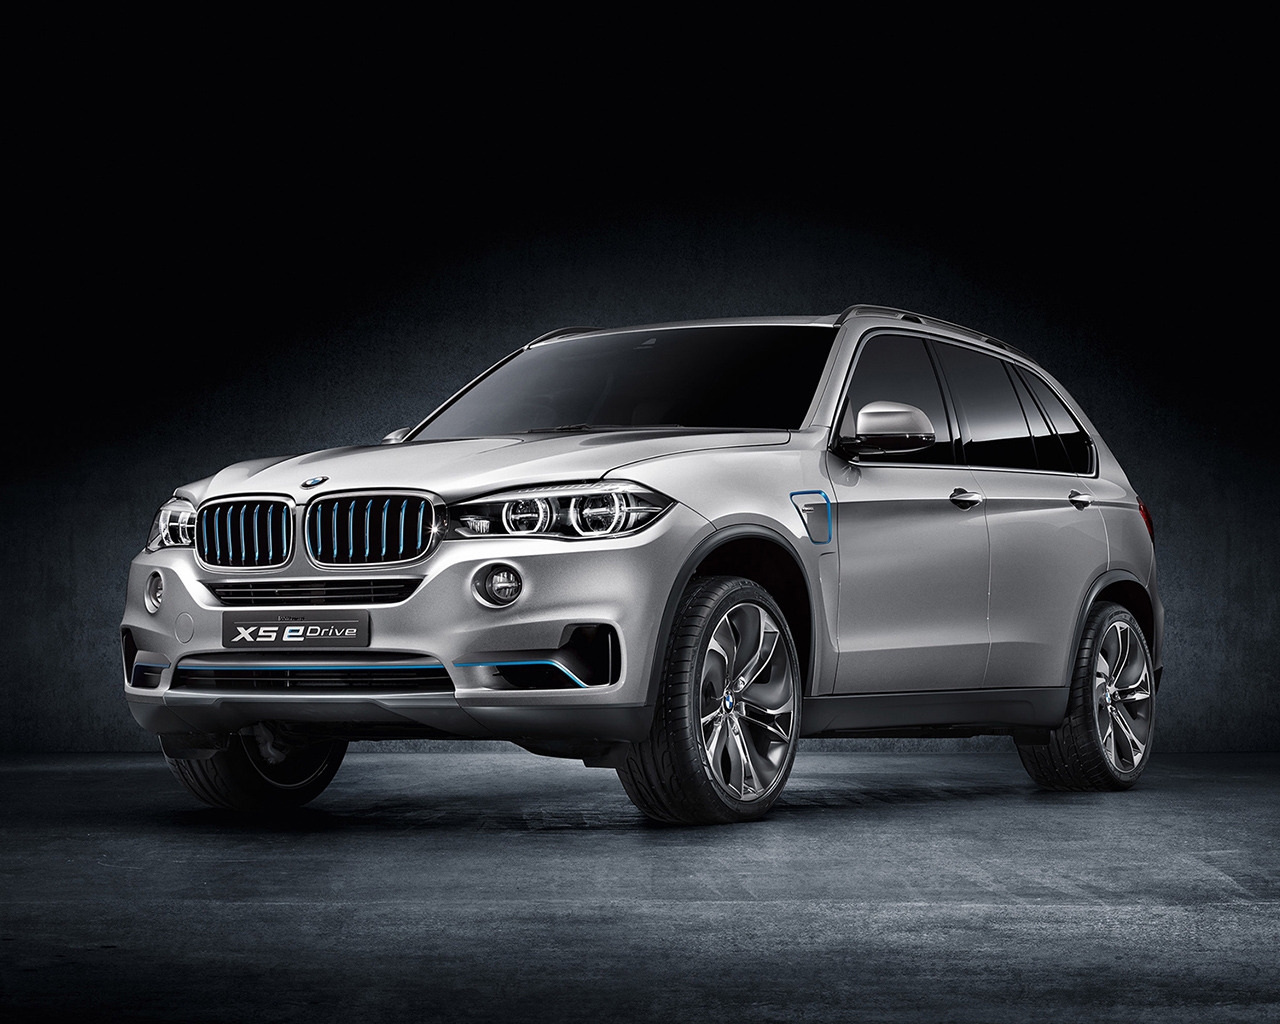 BMW X5 eDrive Concept for 1280 x 1024 resolution